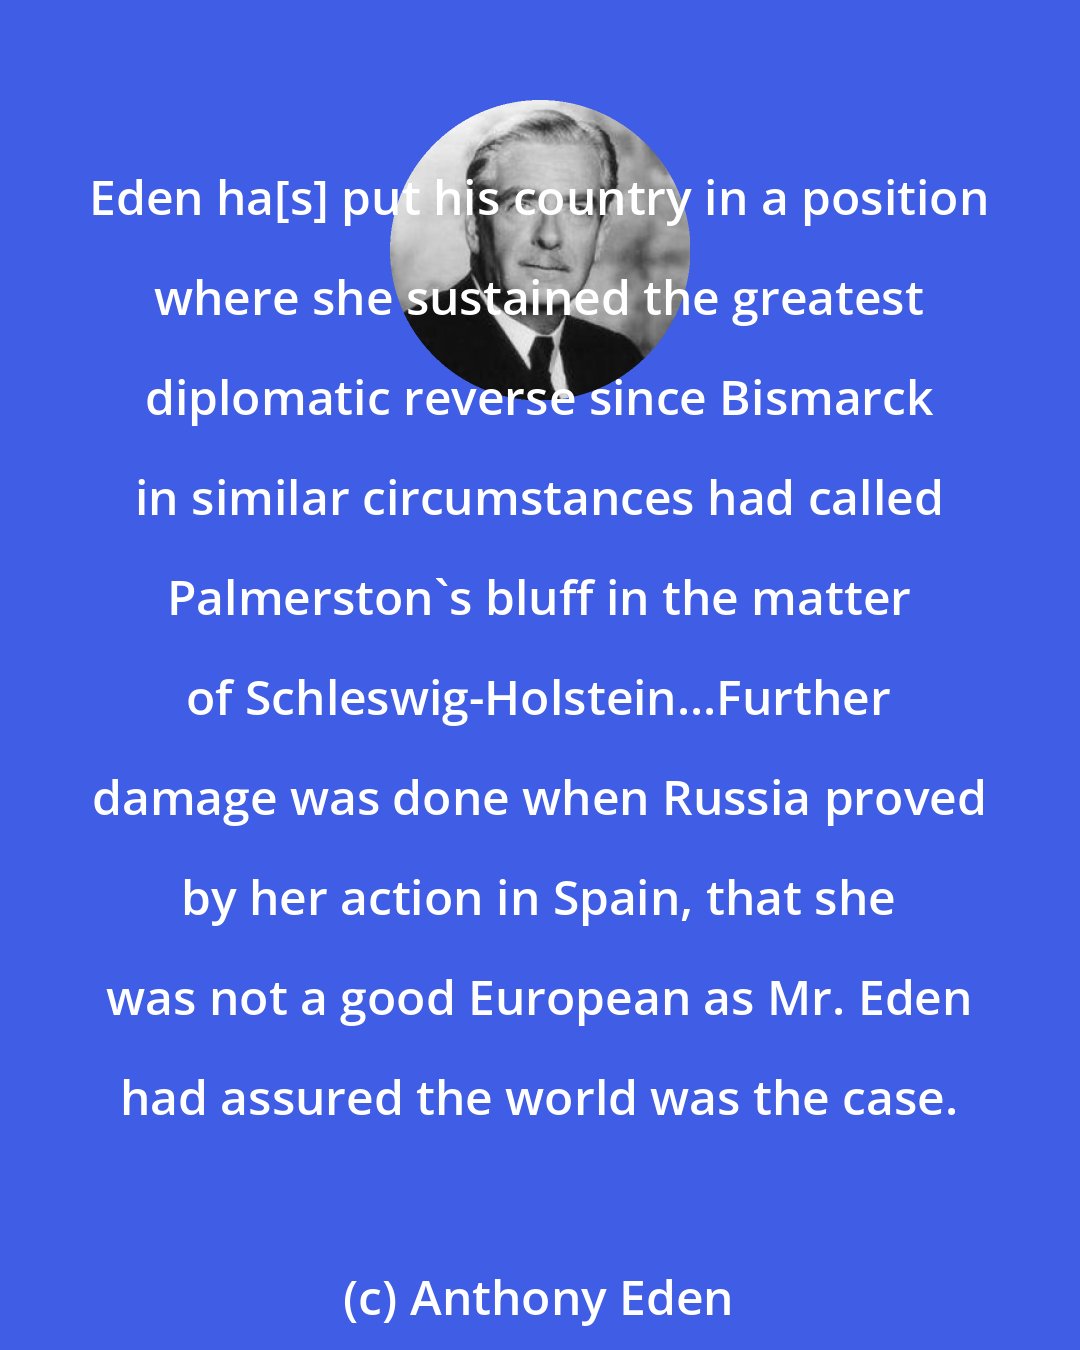 Anthony Eden: Eden ha[s] put his country in a position where she sustained the greatest diplomatic reverse since Bismarck in similar circumstances had called Palmerston's bluff in the matter of Schleswig-Holstein...Further damage was done when Russia proved by her action in Spain, that she was not a good European as Mr. Eden had assured the world was the case.